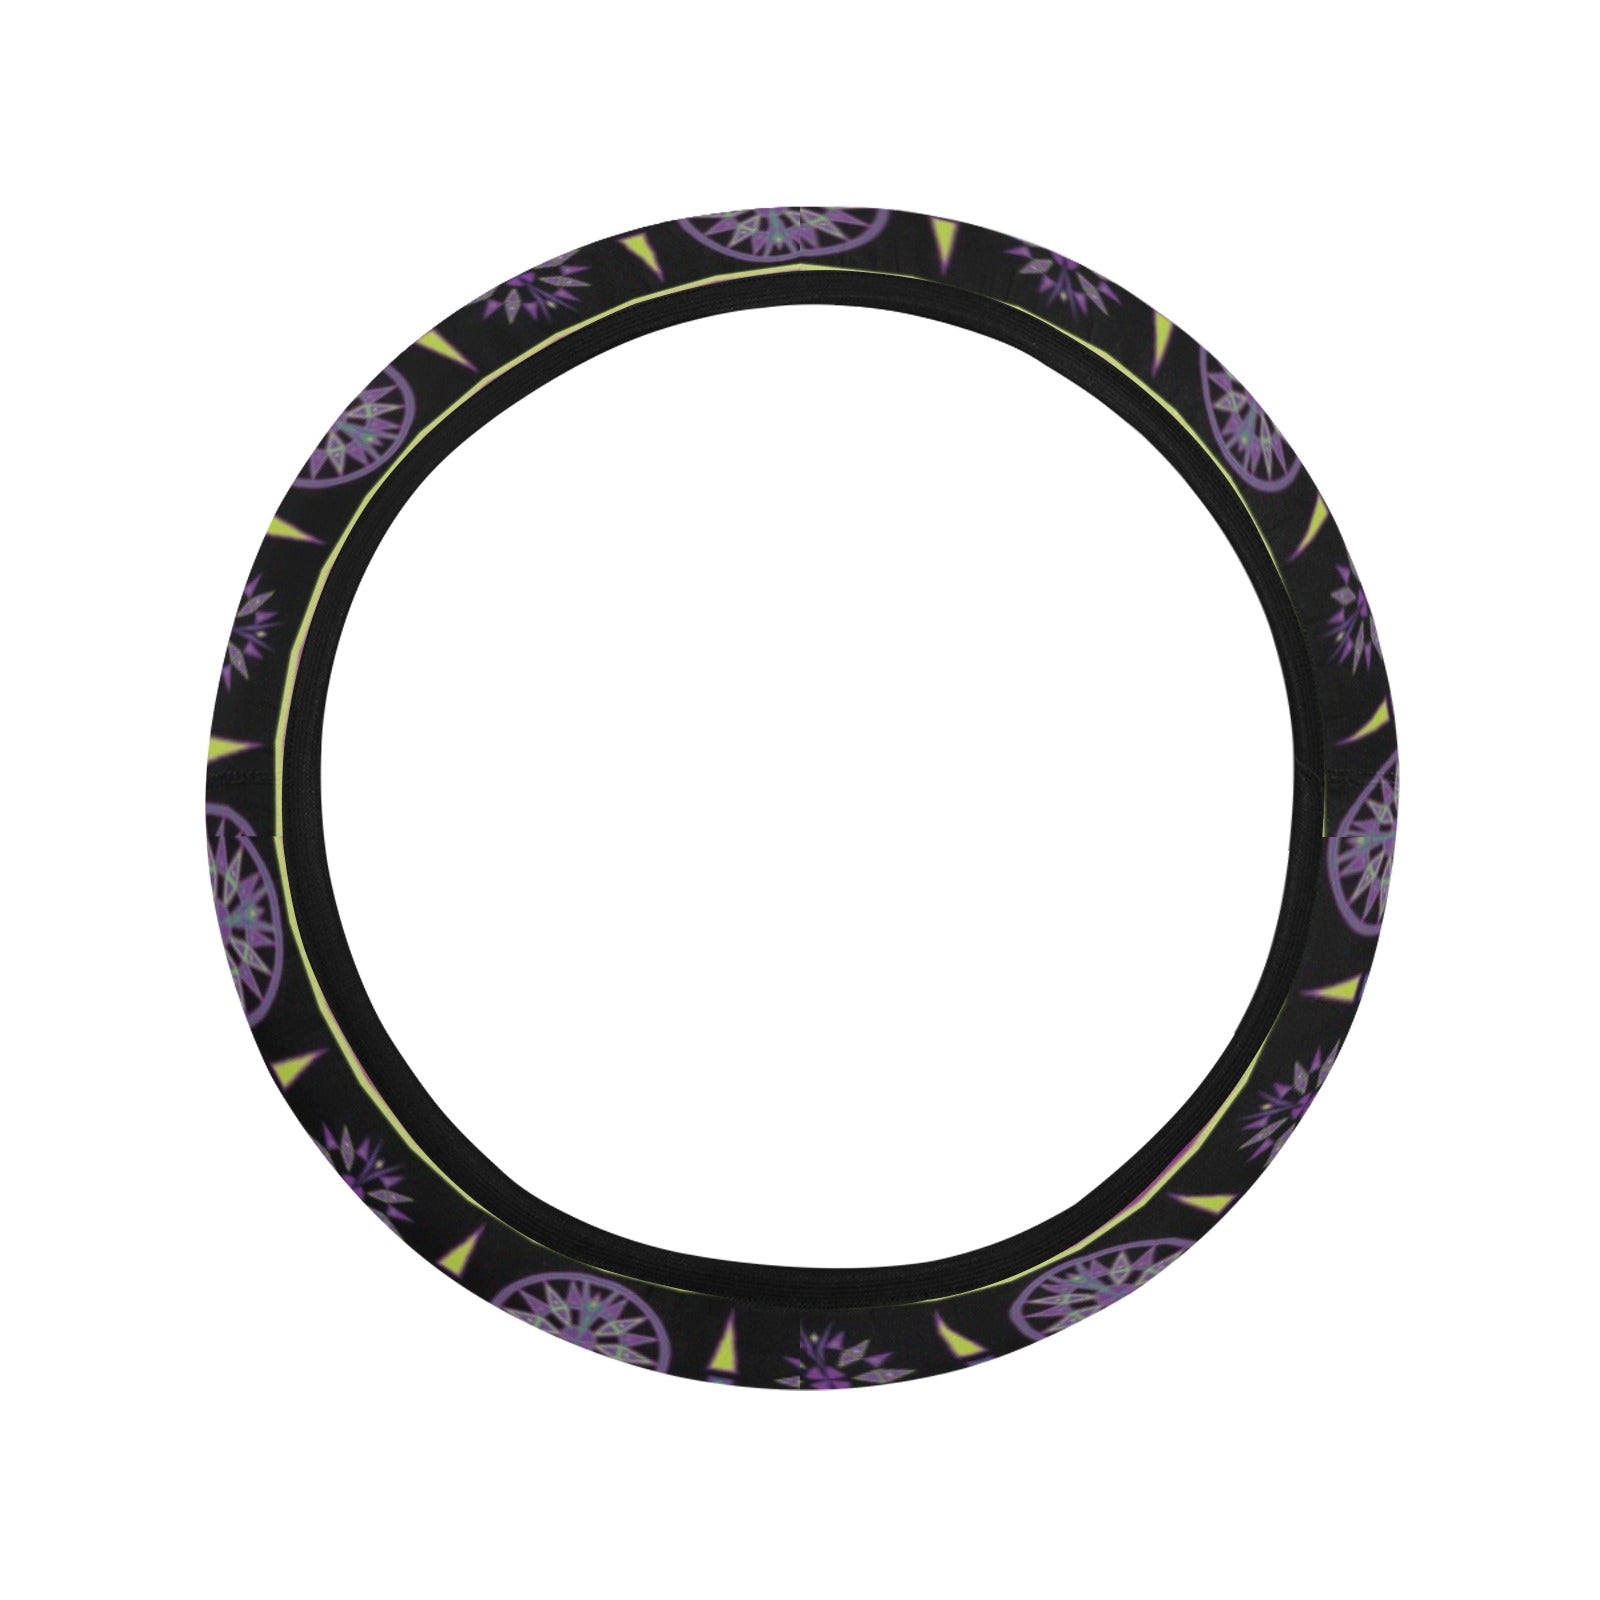 Evening Feather Wheel Steering Wheel Cover with Elastic Edge